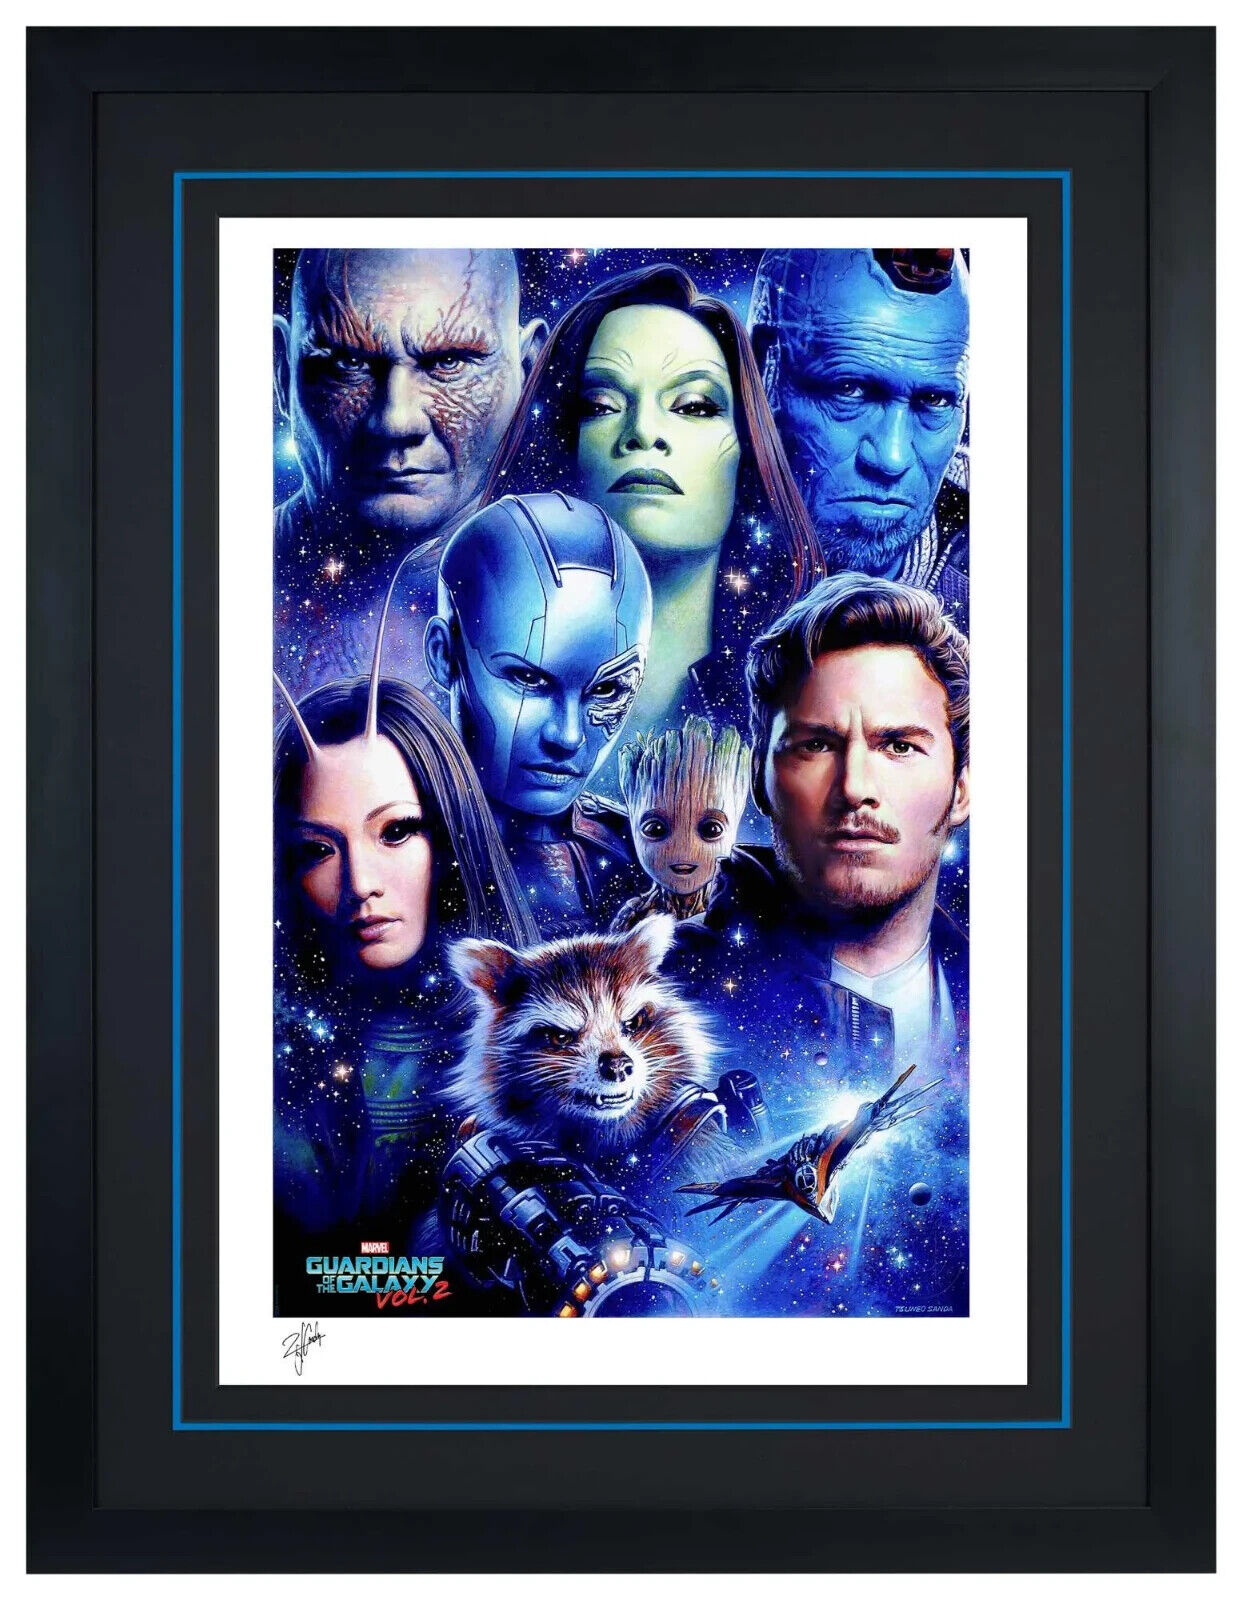 Guardians of the Galaxy Vol. 2 Art Print Sideshow Framed Tsuneo Sanda SOLD OUT